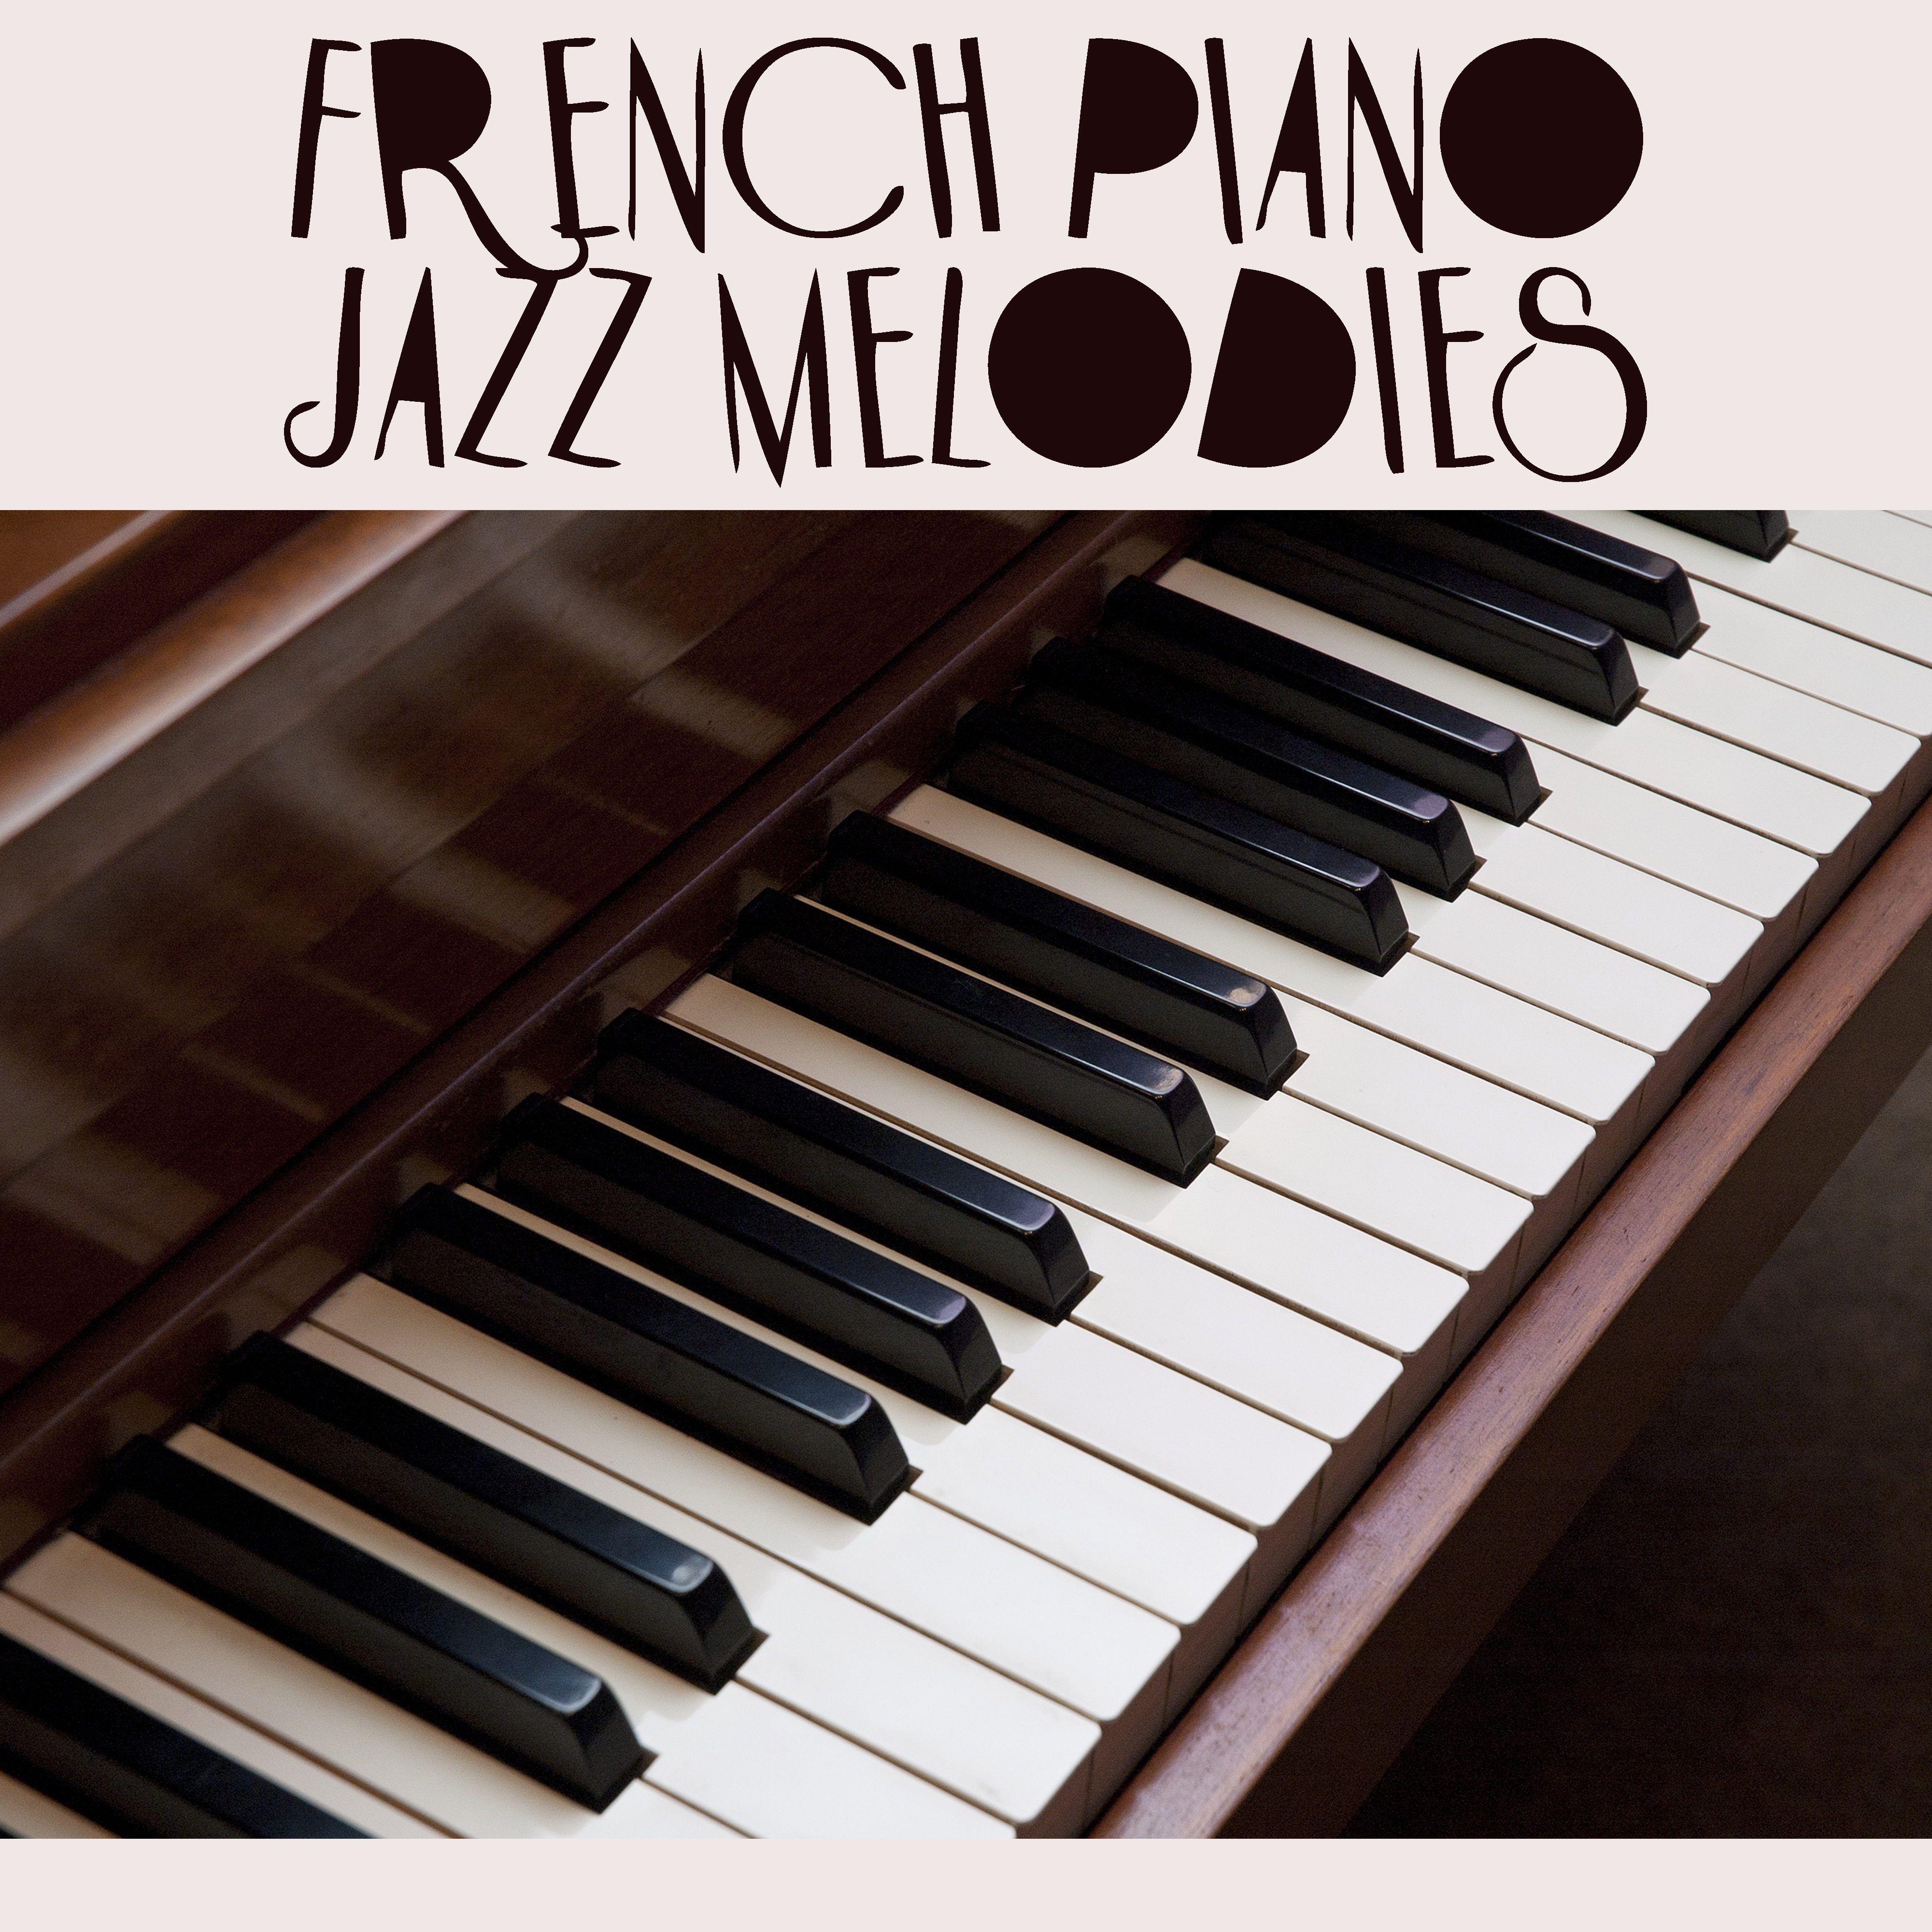 French Piano Jazz Melodies